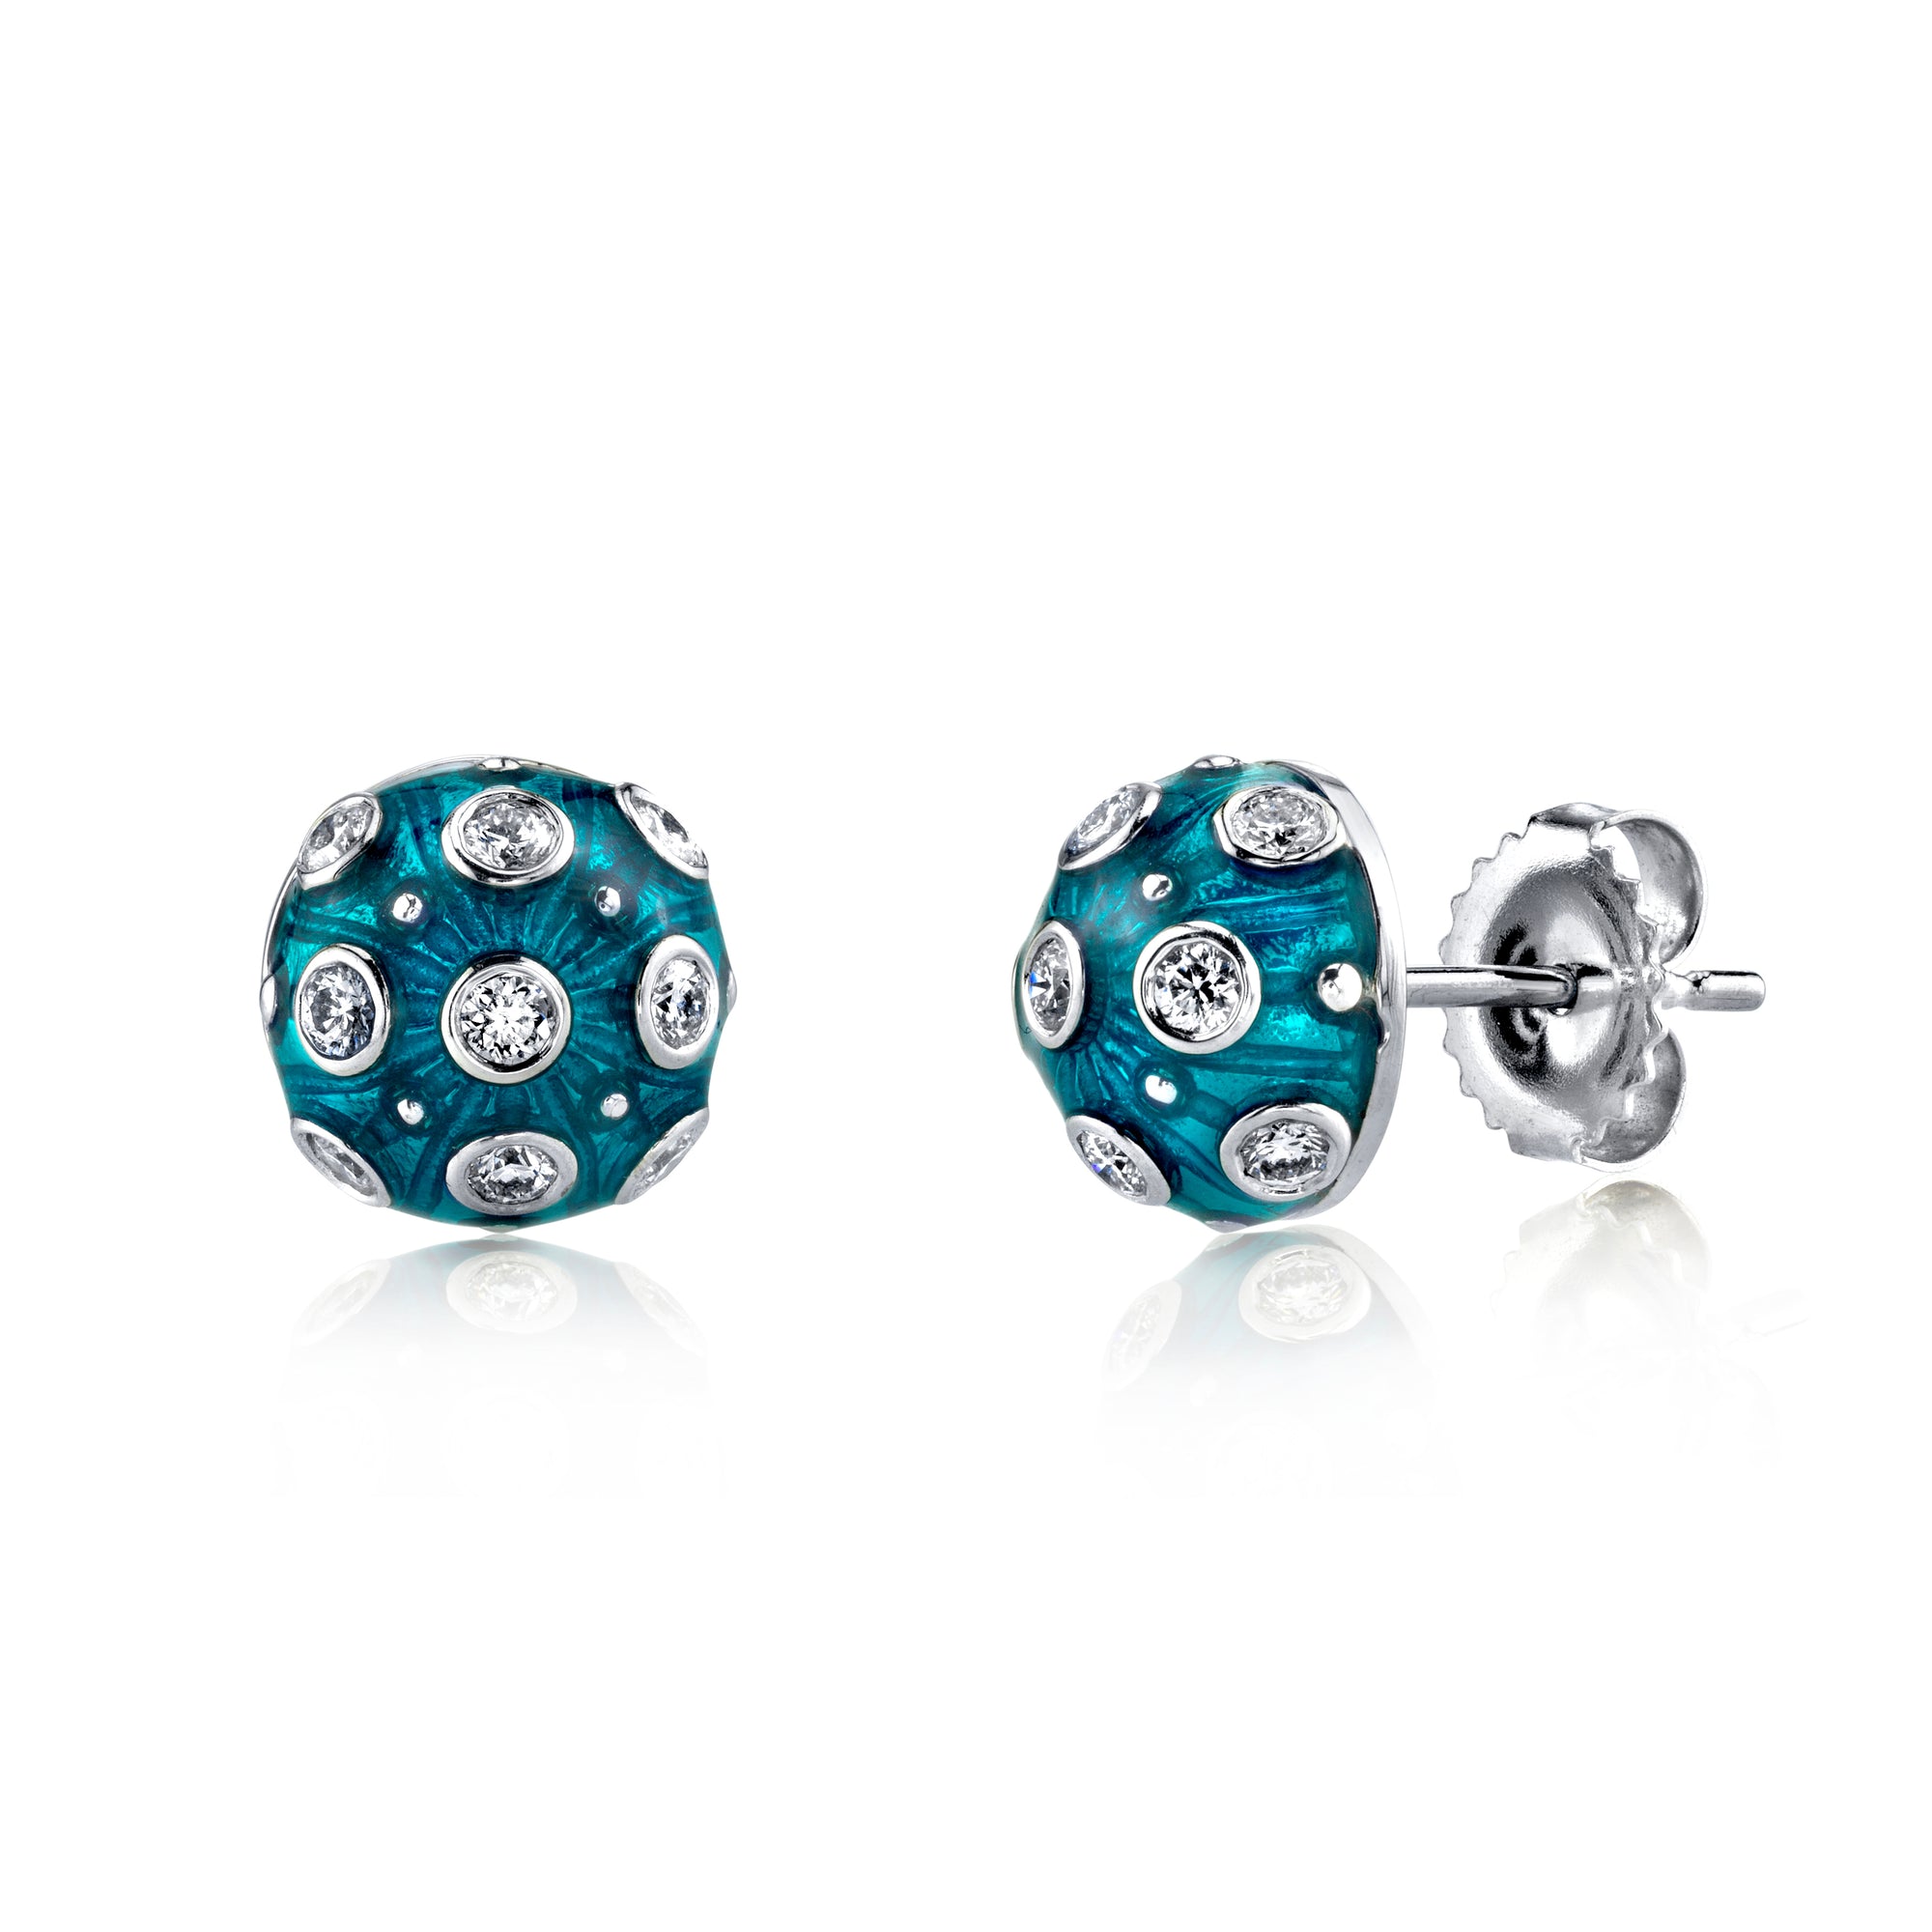 18k White Gold, Blue Enamel and Diamond Stud Earrings by Lord Jewelry - Talisman Collection Fine Jewelers